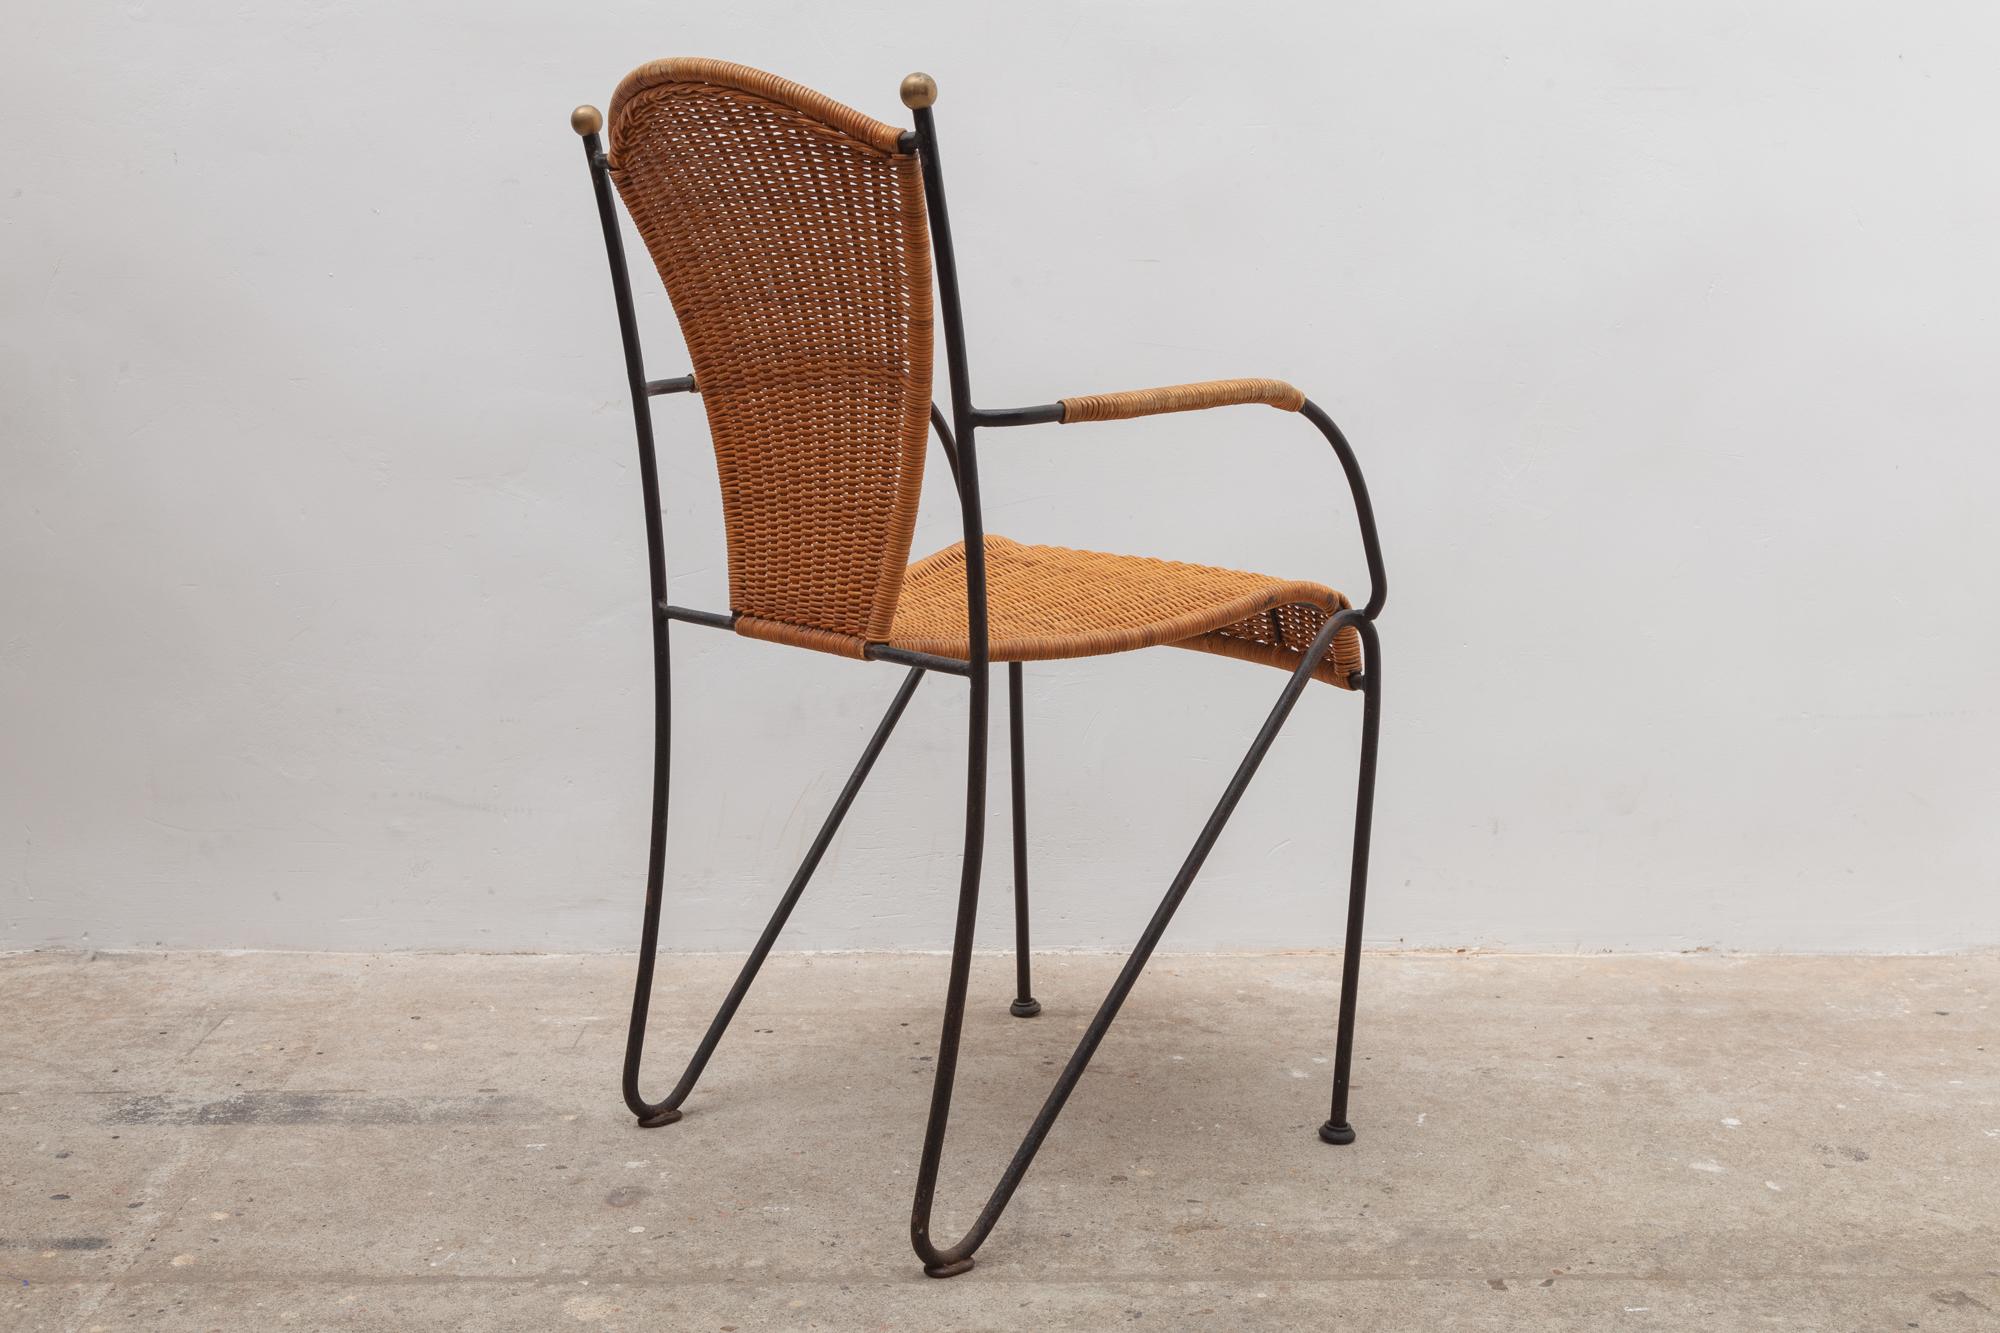 Iron and Rattan Indoor and Outdoor Patio Chairs by Pipsan Saarinen Swanson 1